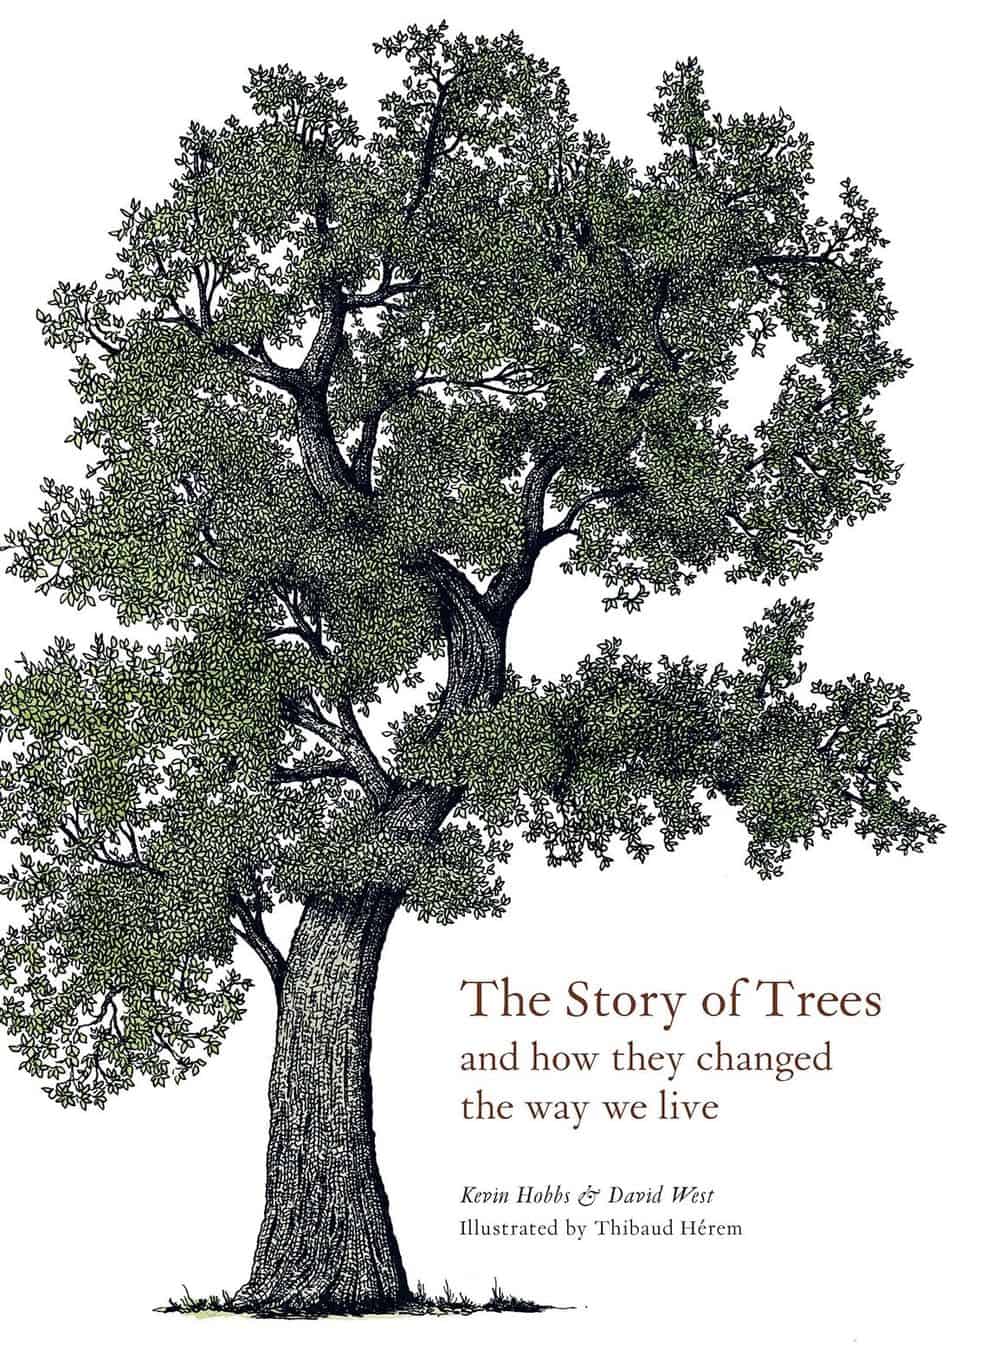 >The story of trees